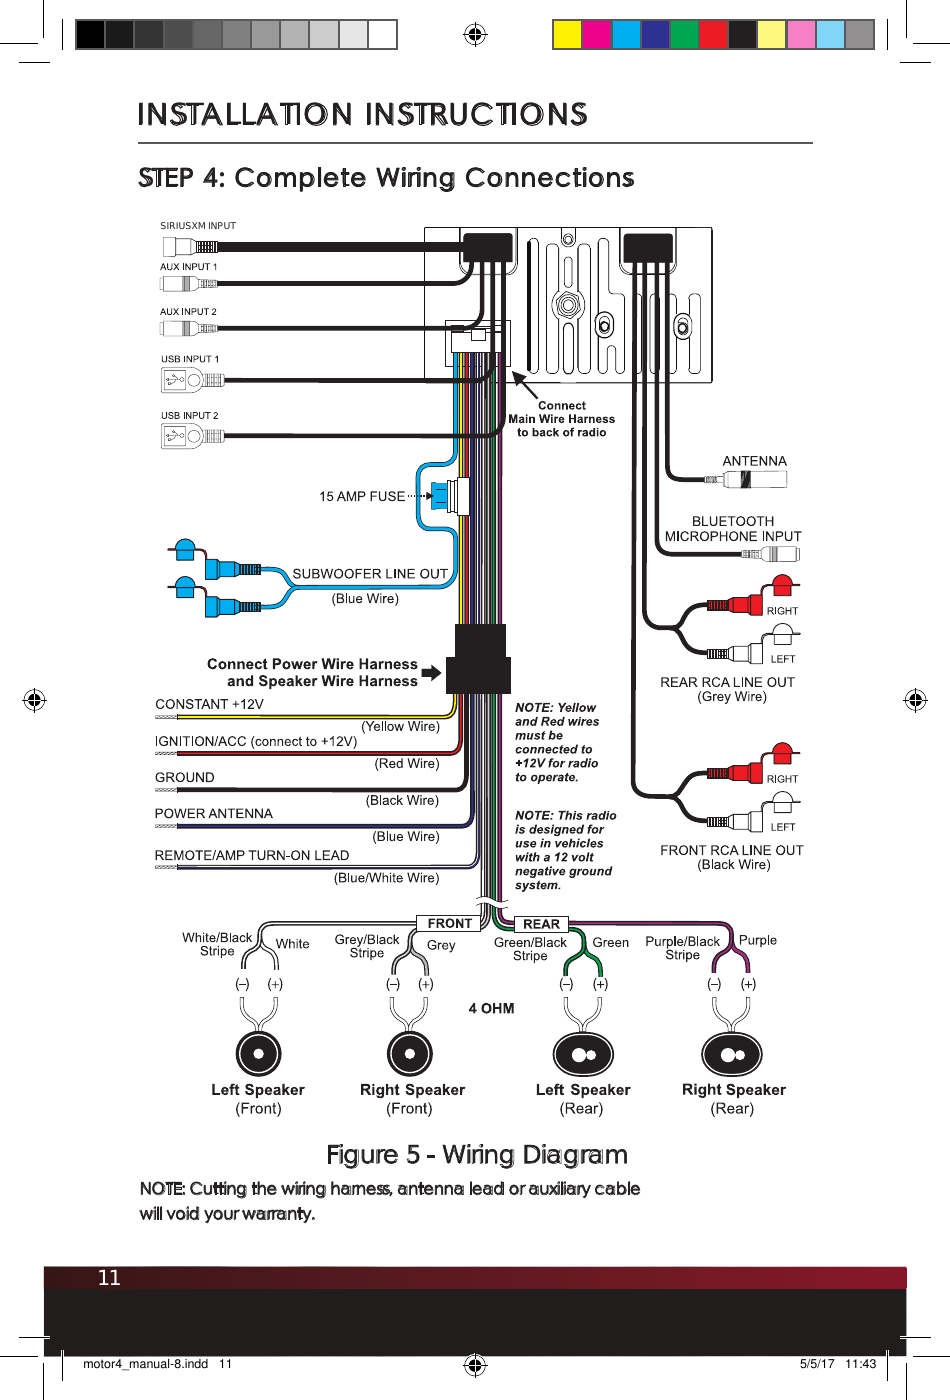 11INSTALLATION INSTRUCTIONSFigure 5 - Wiring DiagramNOTE: Cutting the wiring harness, antenna lead or auxiliary cable  will void your warranty. STEP 4: Complete Wiring ConnectionsSIRIUSXM INPUTmotor4_manual-8.indd   11 5/5/17   11:43